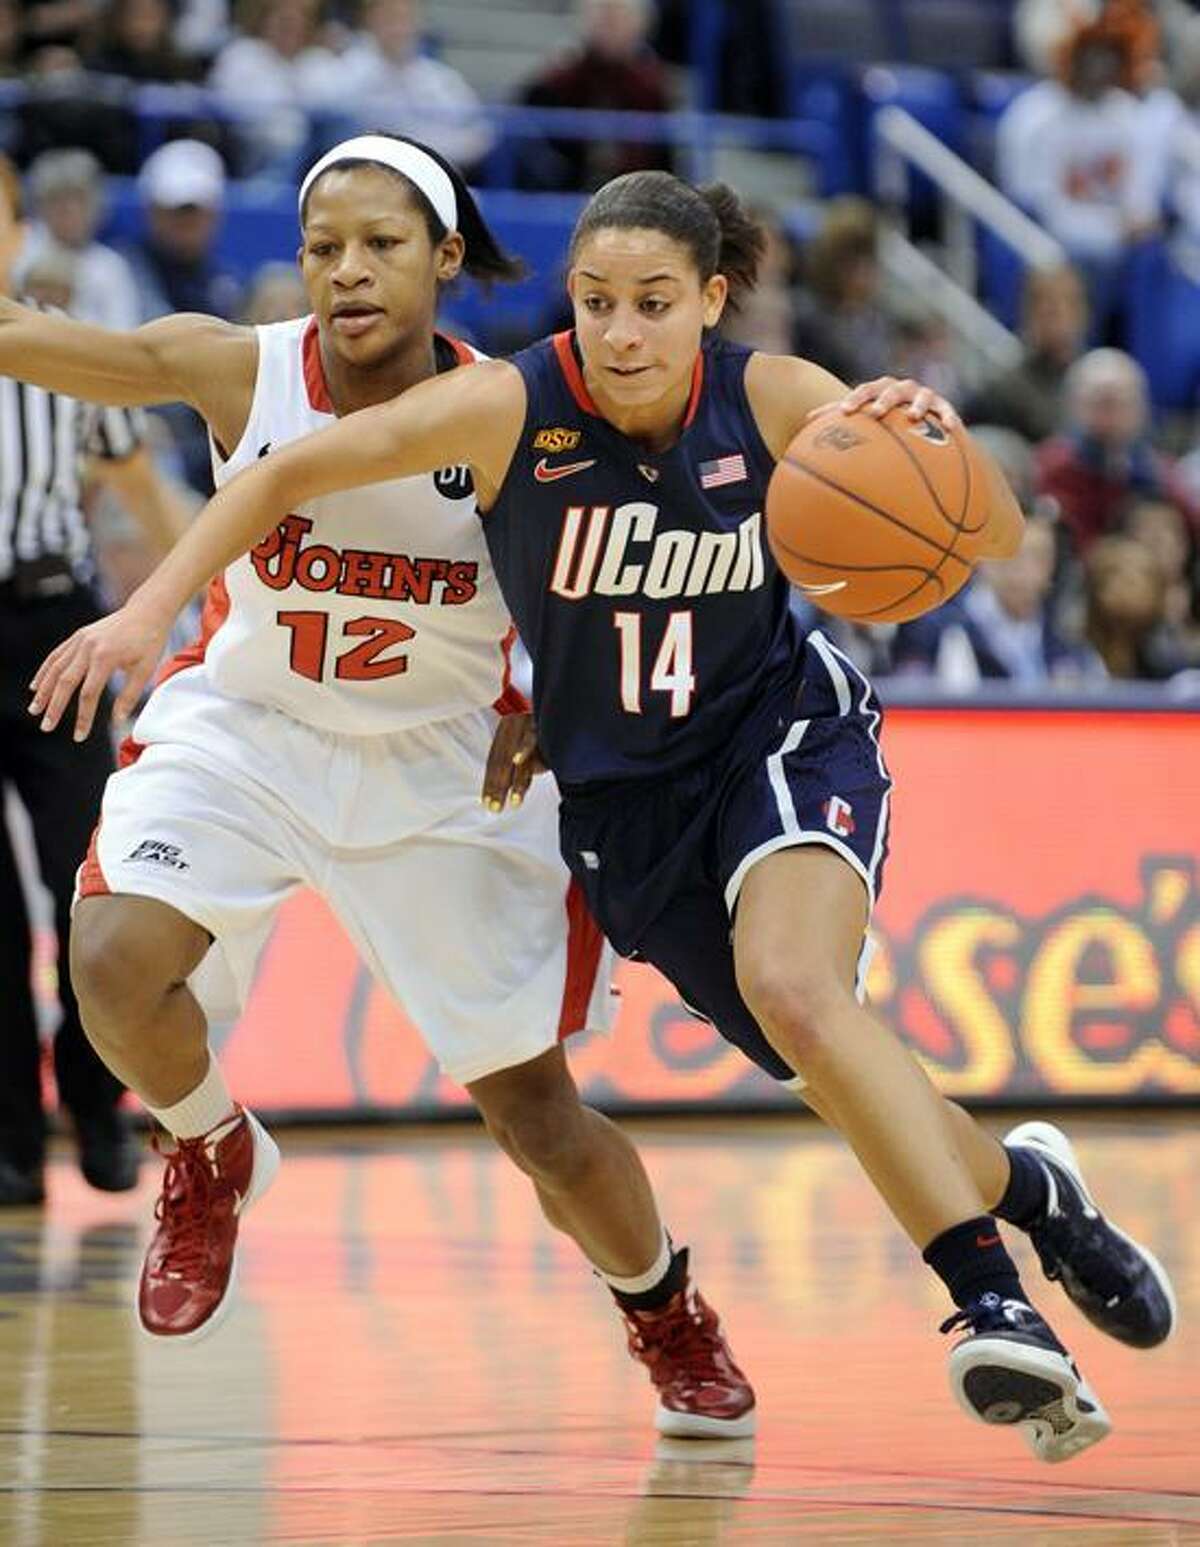 Connecticut's Bria Hartley, right, drives past St. John's Briana Brown during the first half Connecticut's 74-43 victory in an NCAA college basketball game in the semifinals of the Big East women's tournament in Hartford, Conn., Monday, March 5, 2012. (AP Photo/Fred Beckham)